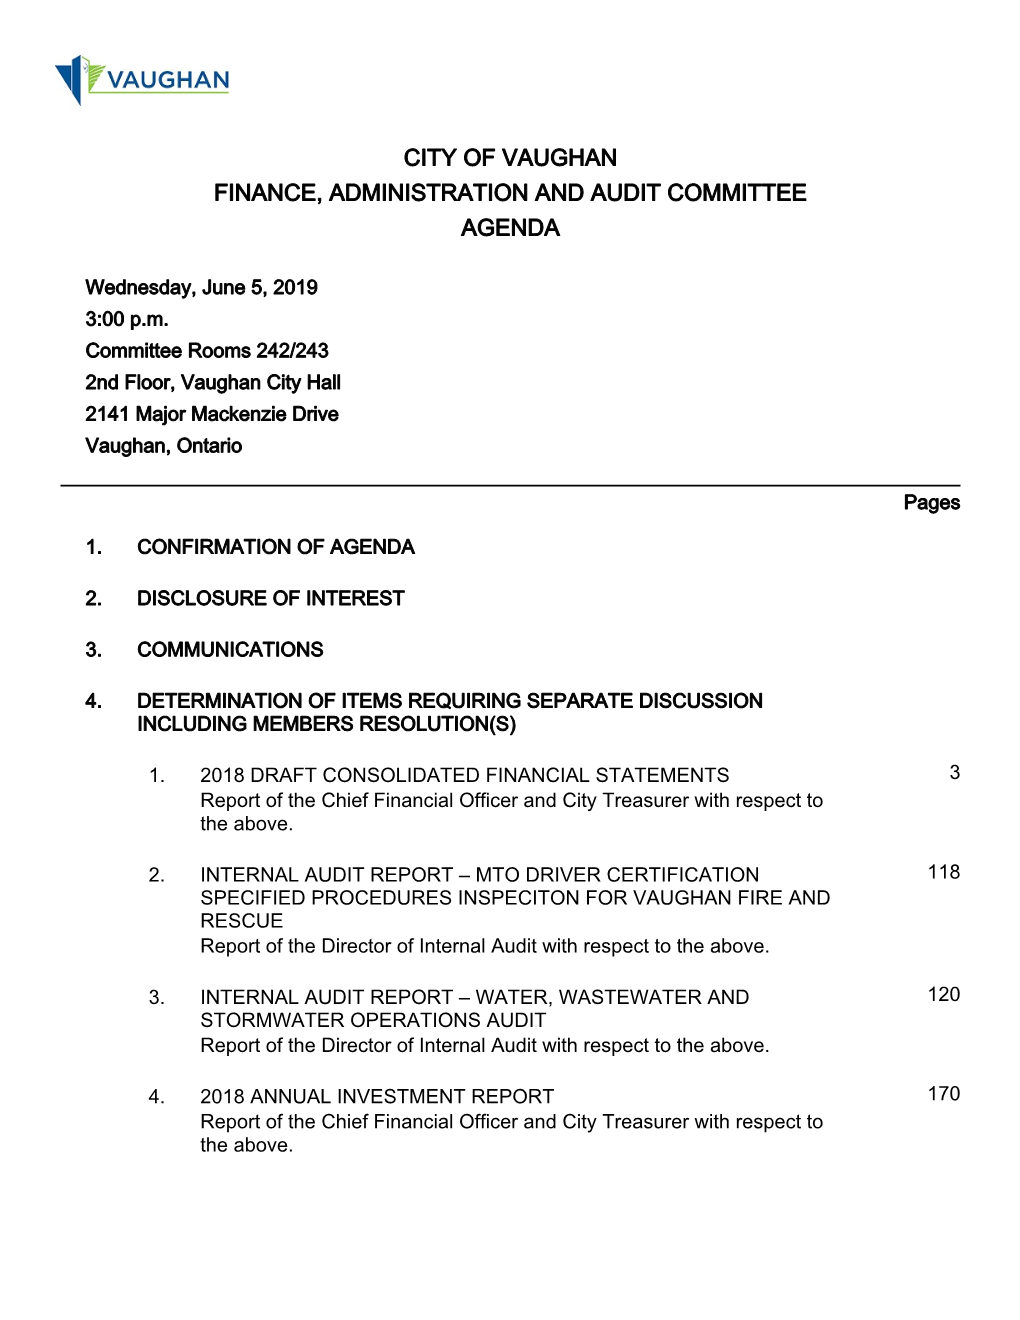 City of Vaughan Finance, Administration and Audit Committee Agenda